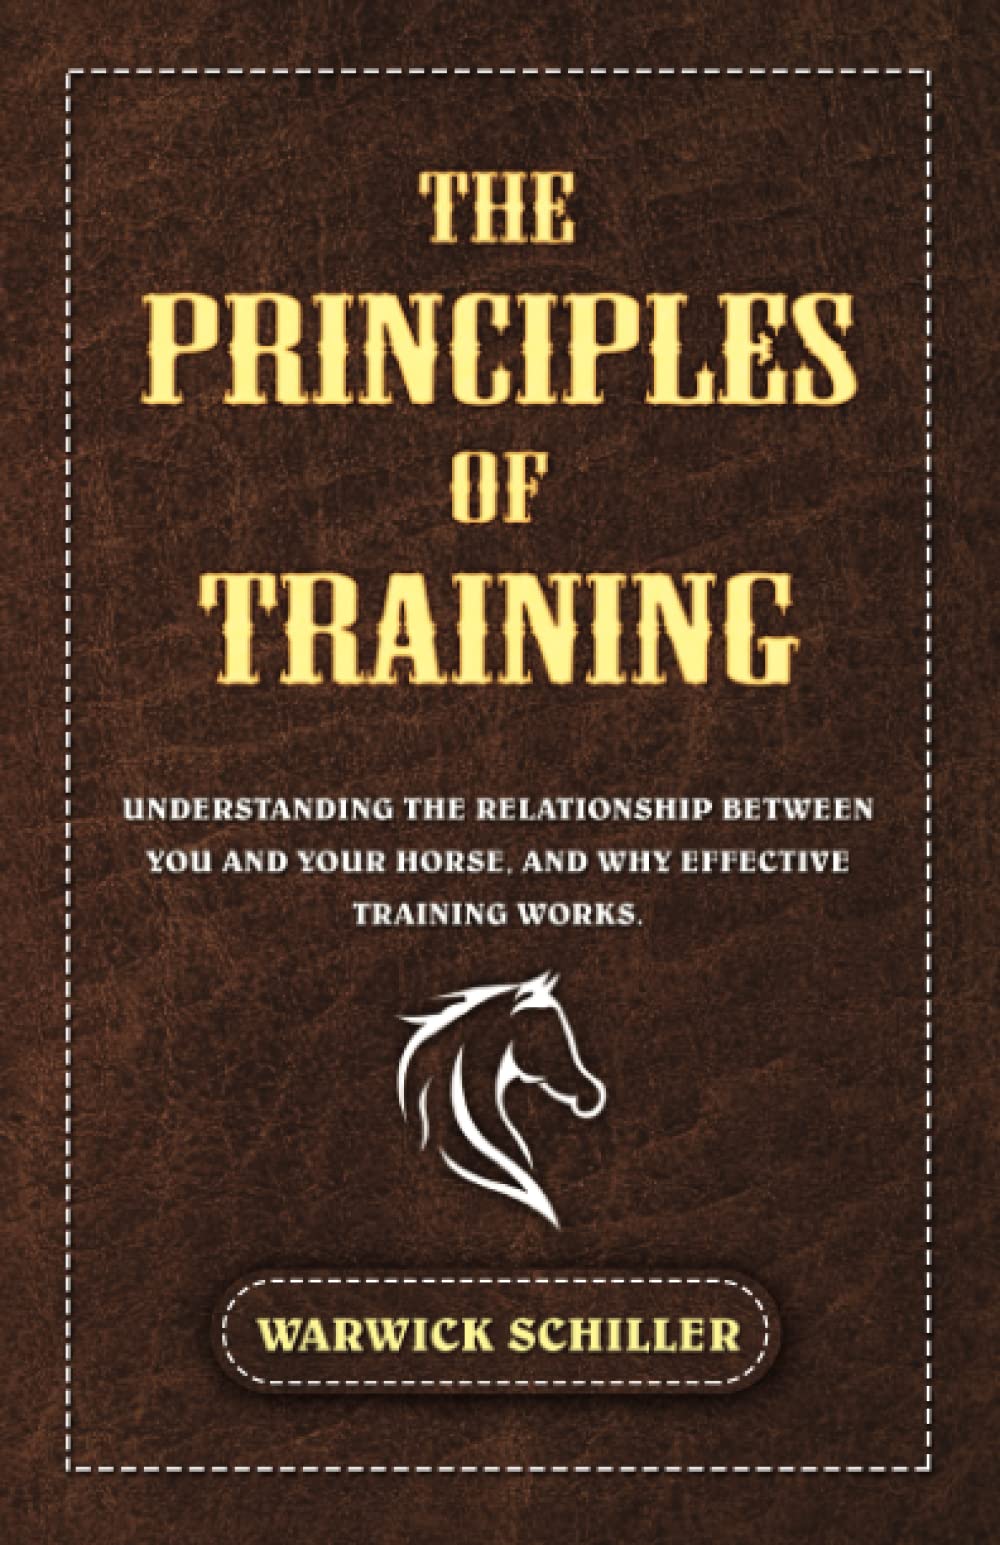 The Principles of Training: Understanding The Relationship Between You and Your Horse, and Why Effective Training Works.